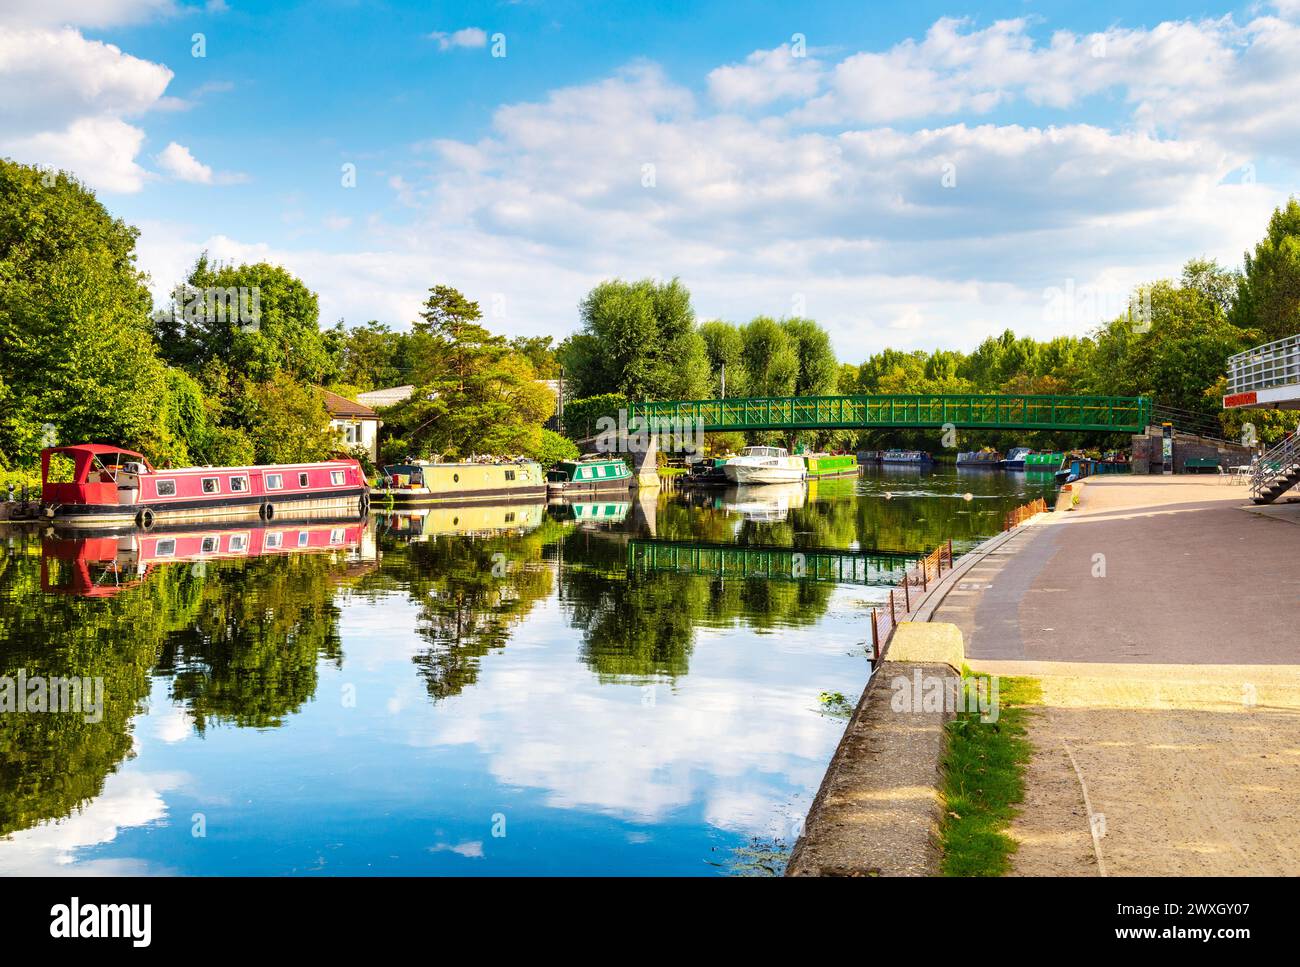 Canal boats and the High Bridge over the River Lea near Walthamstow Wetlands, London, England Stock Photo